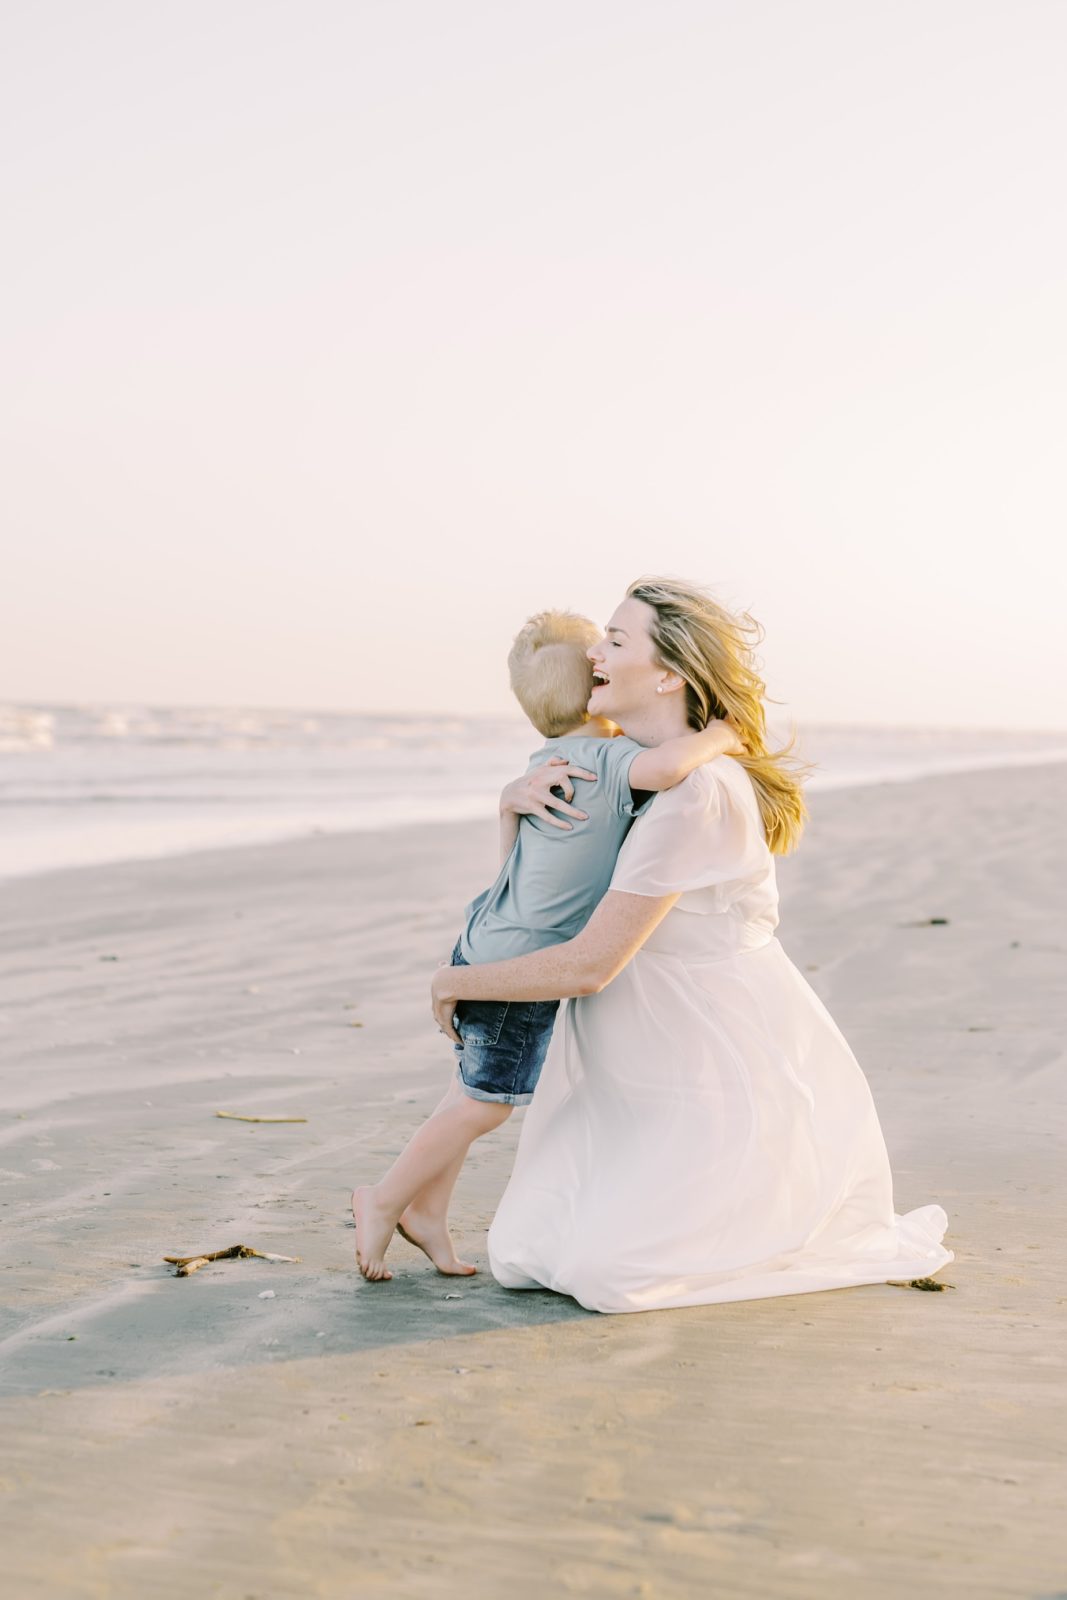 Little boy runs into his mother's arms on the Galveston Beach by Chrisitina Elliott Photography. mother embrace portrait #ChristinaElliottPhotography #ChristinaElliottFamilies #GalvestonPhotography #Beachmaternityphotography #Texasfamilyphotographers